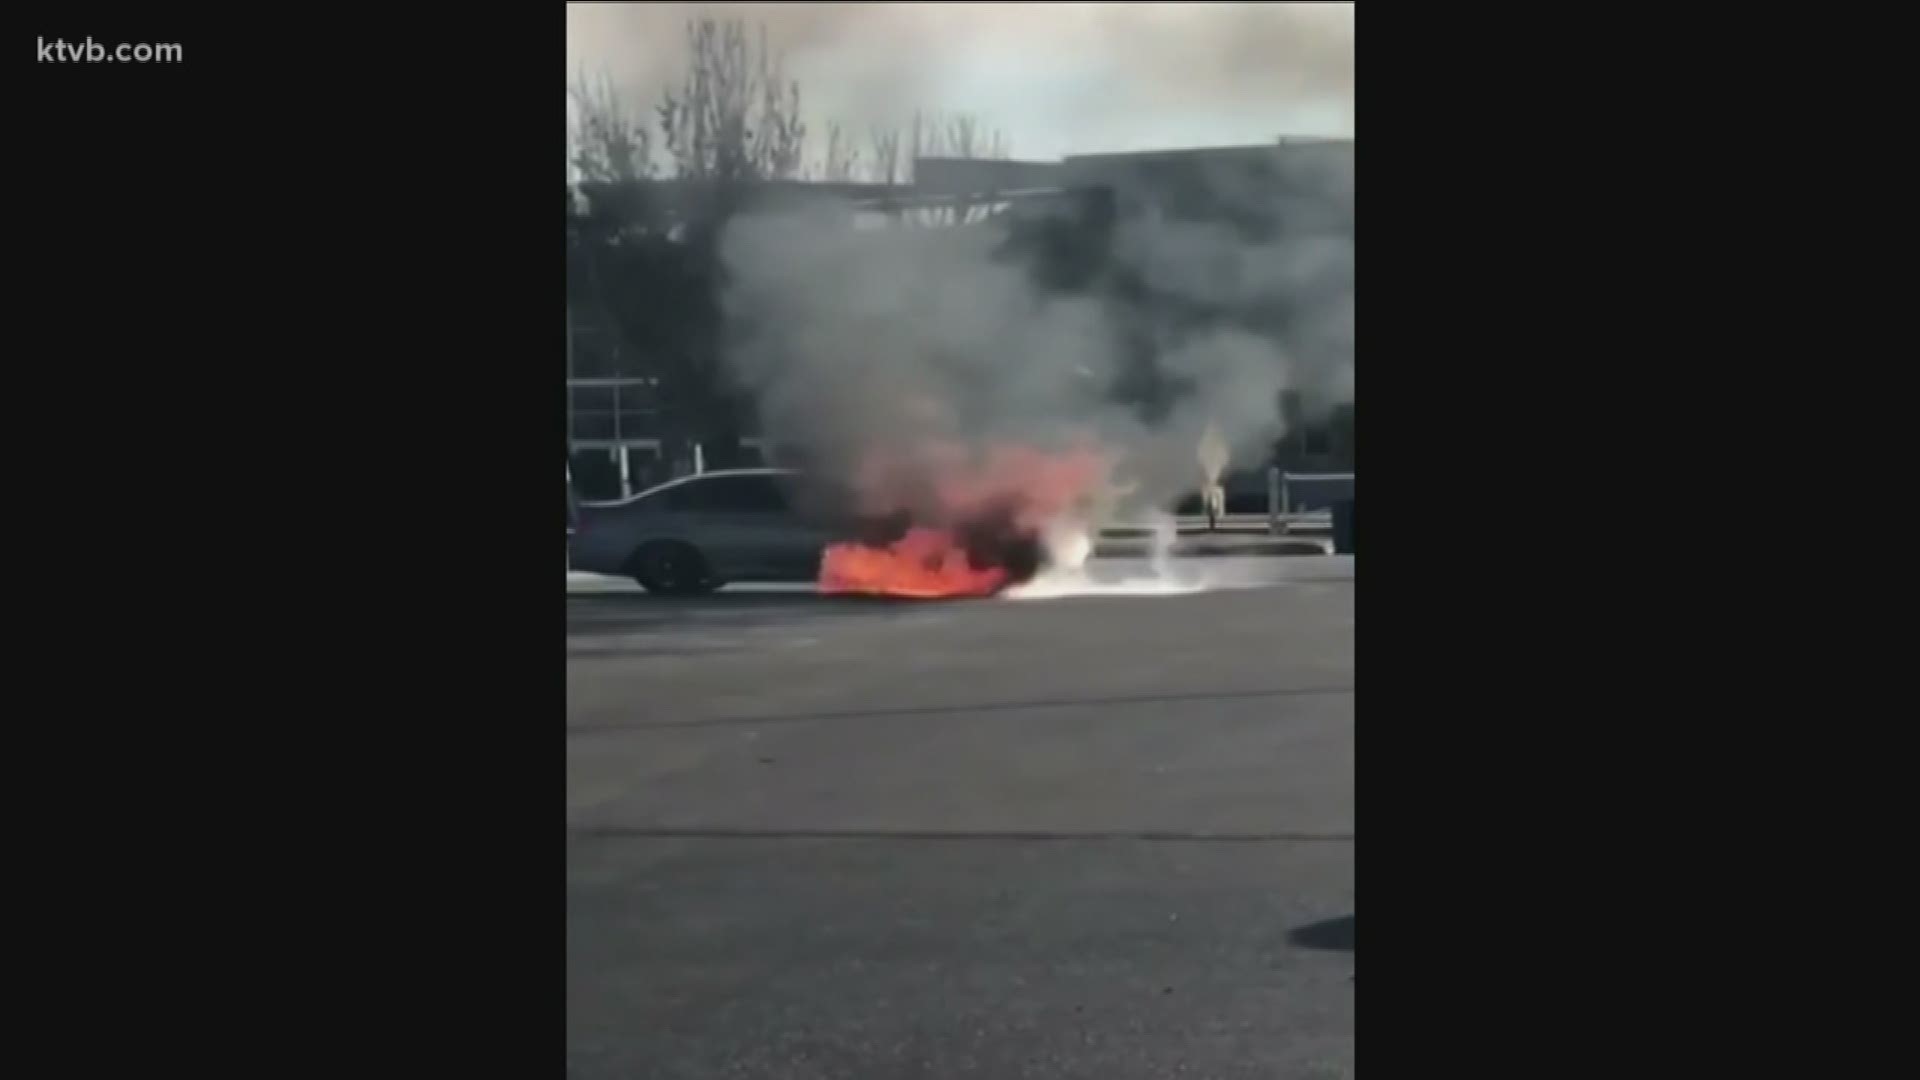 The driver of the car managed to pull it away from other vehicles so they did not catch fire.